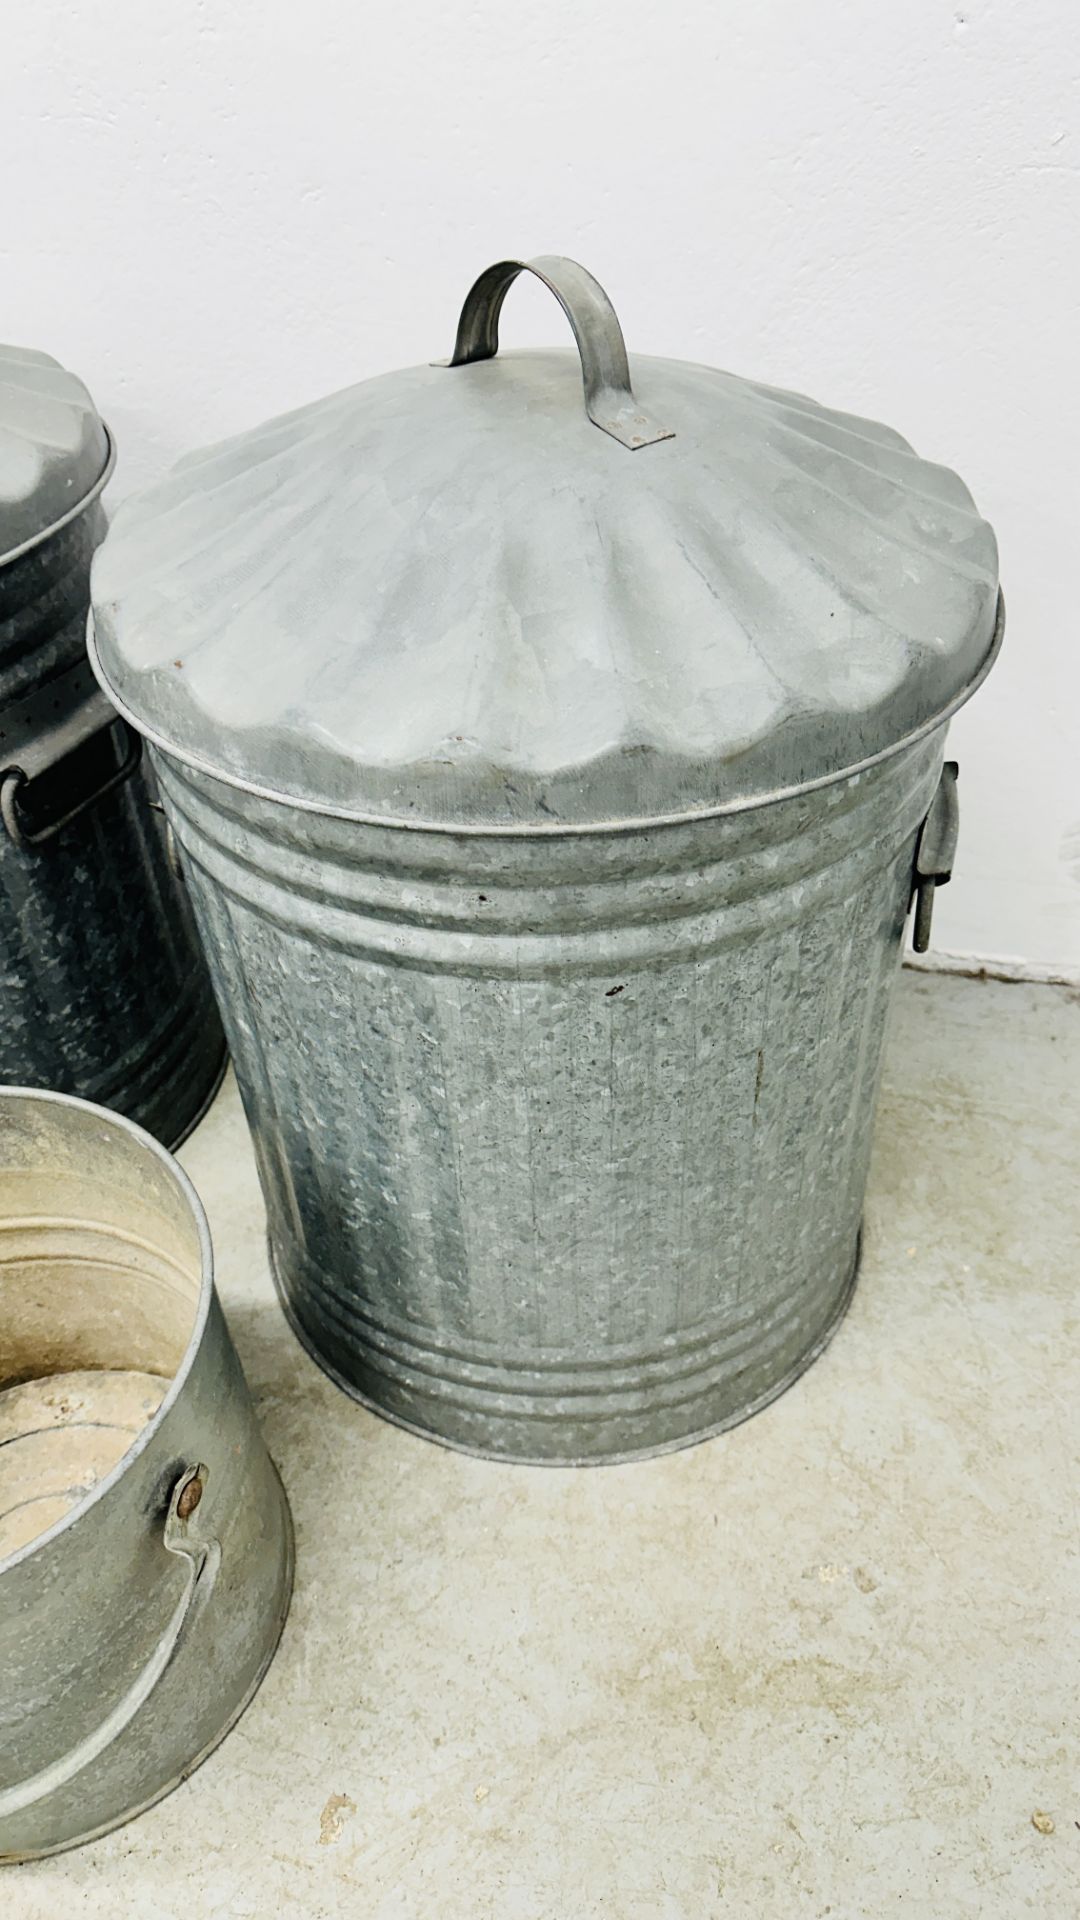 TWO GALVANISED DUSTBINS WITH LIDS AND GALVANISED PALE. - Image 2 of 5